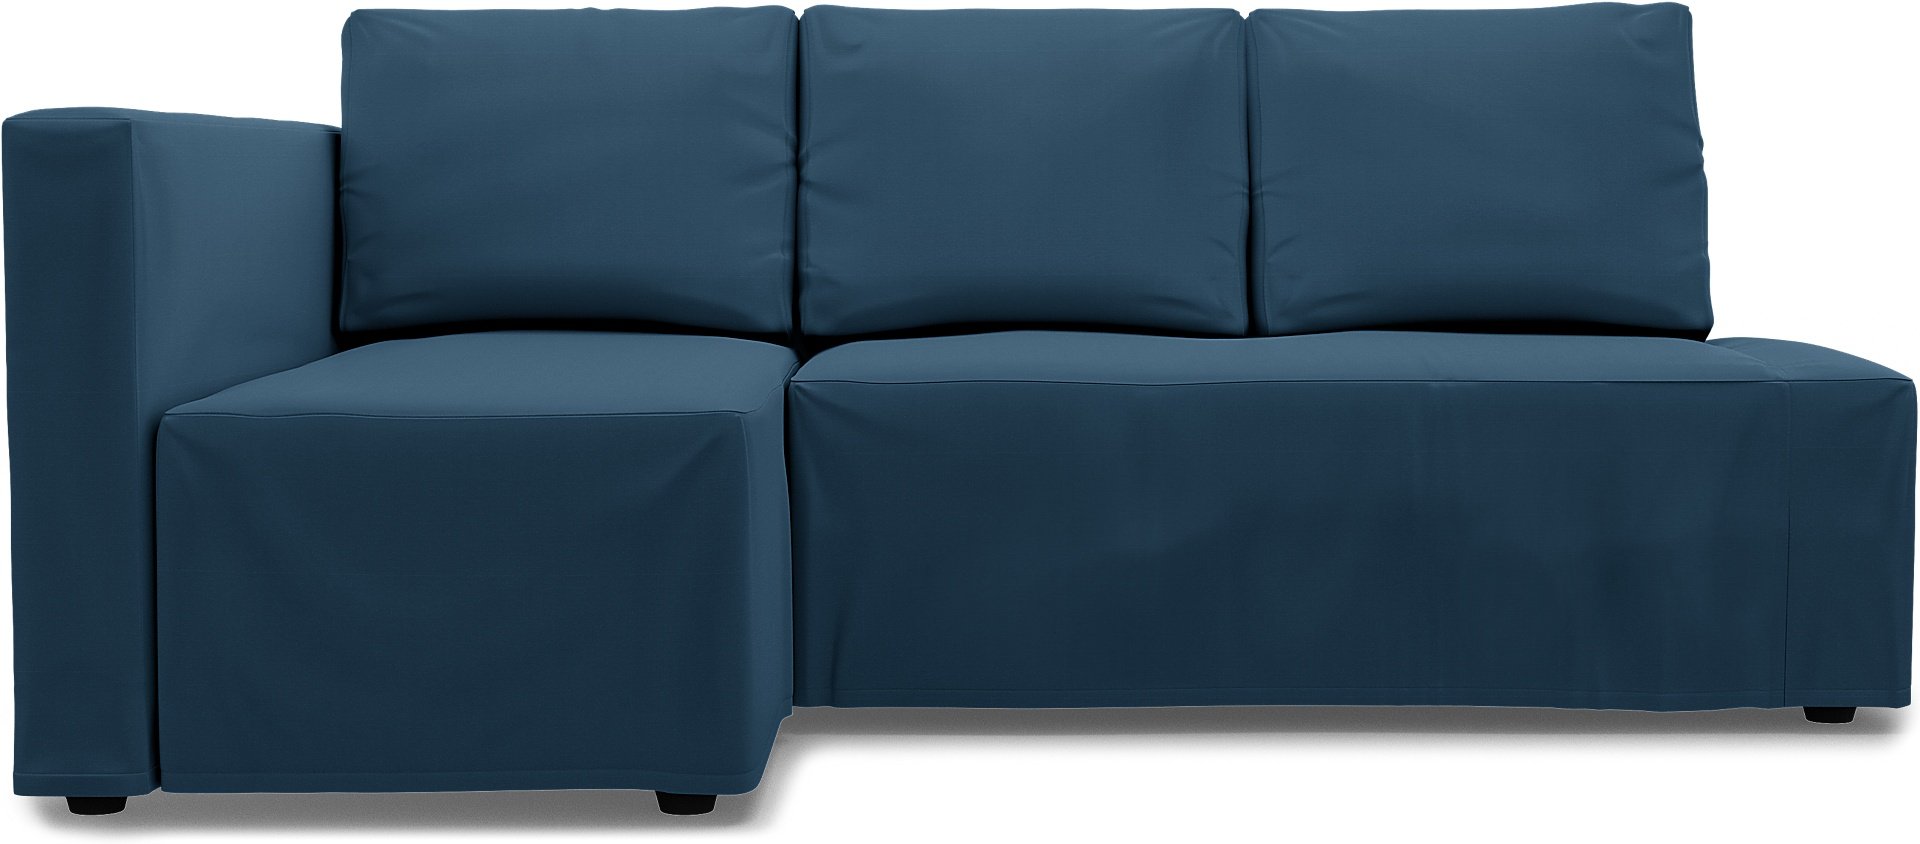 IKEA - Friheten Sofa Bed with Left Chaise Cover, Real Teal, Cotton - Bemz